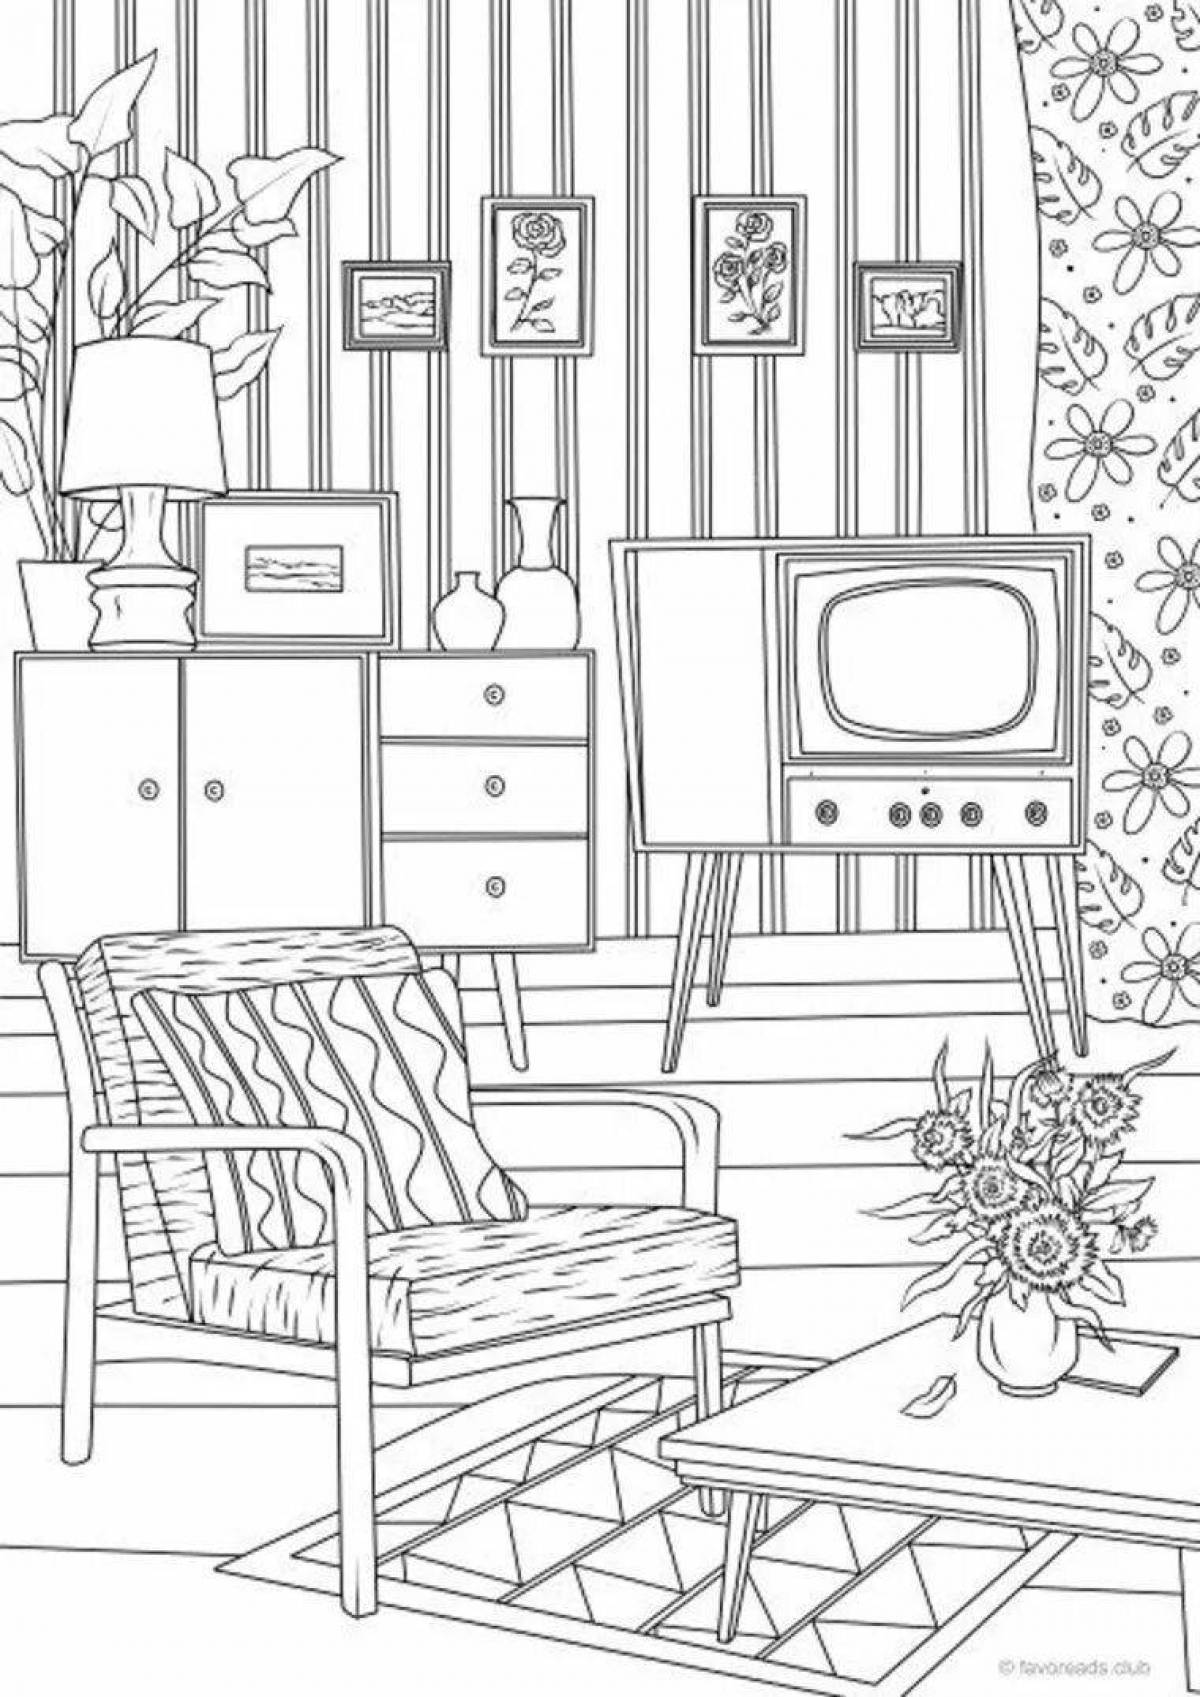 A cheerful coloring book for the interior of a children's room